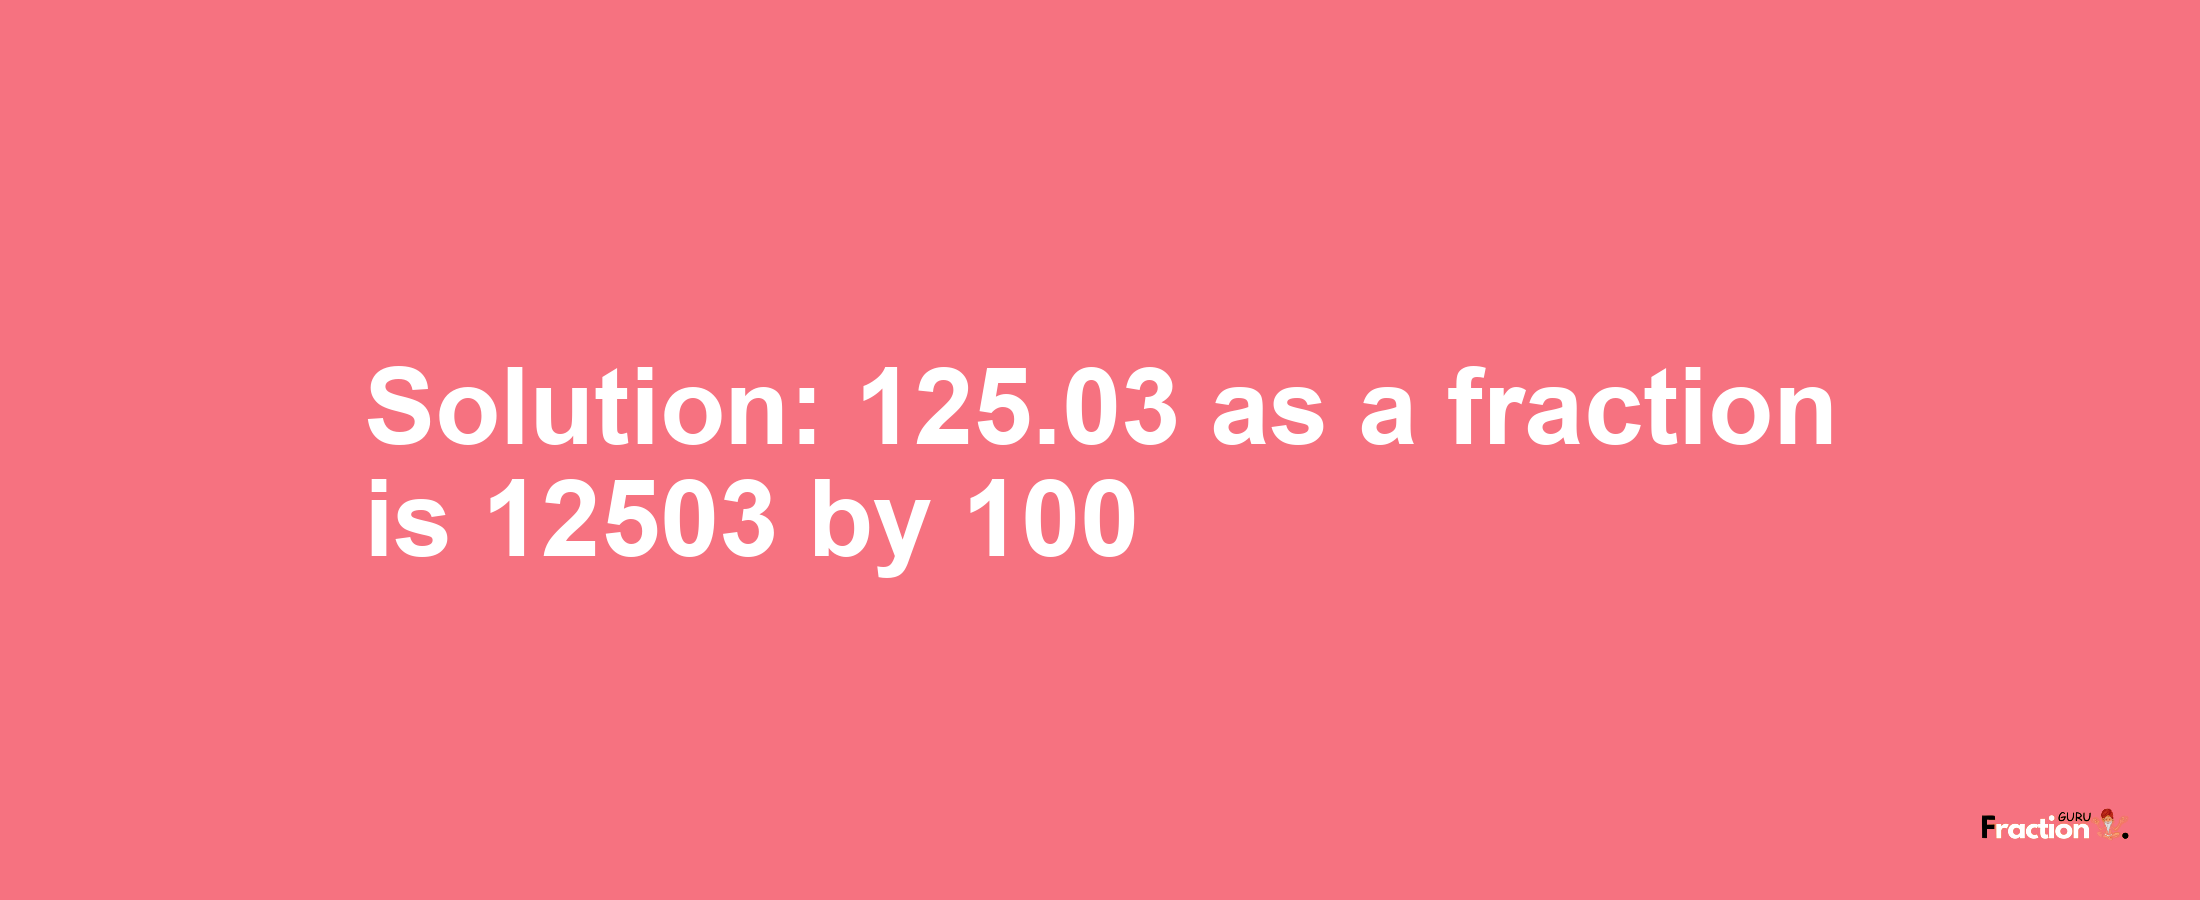 Solution:125.03 as a fraction is 12503/100